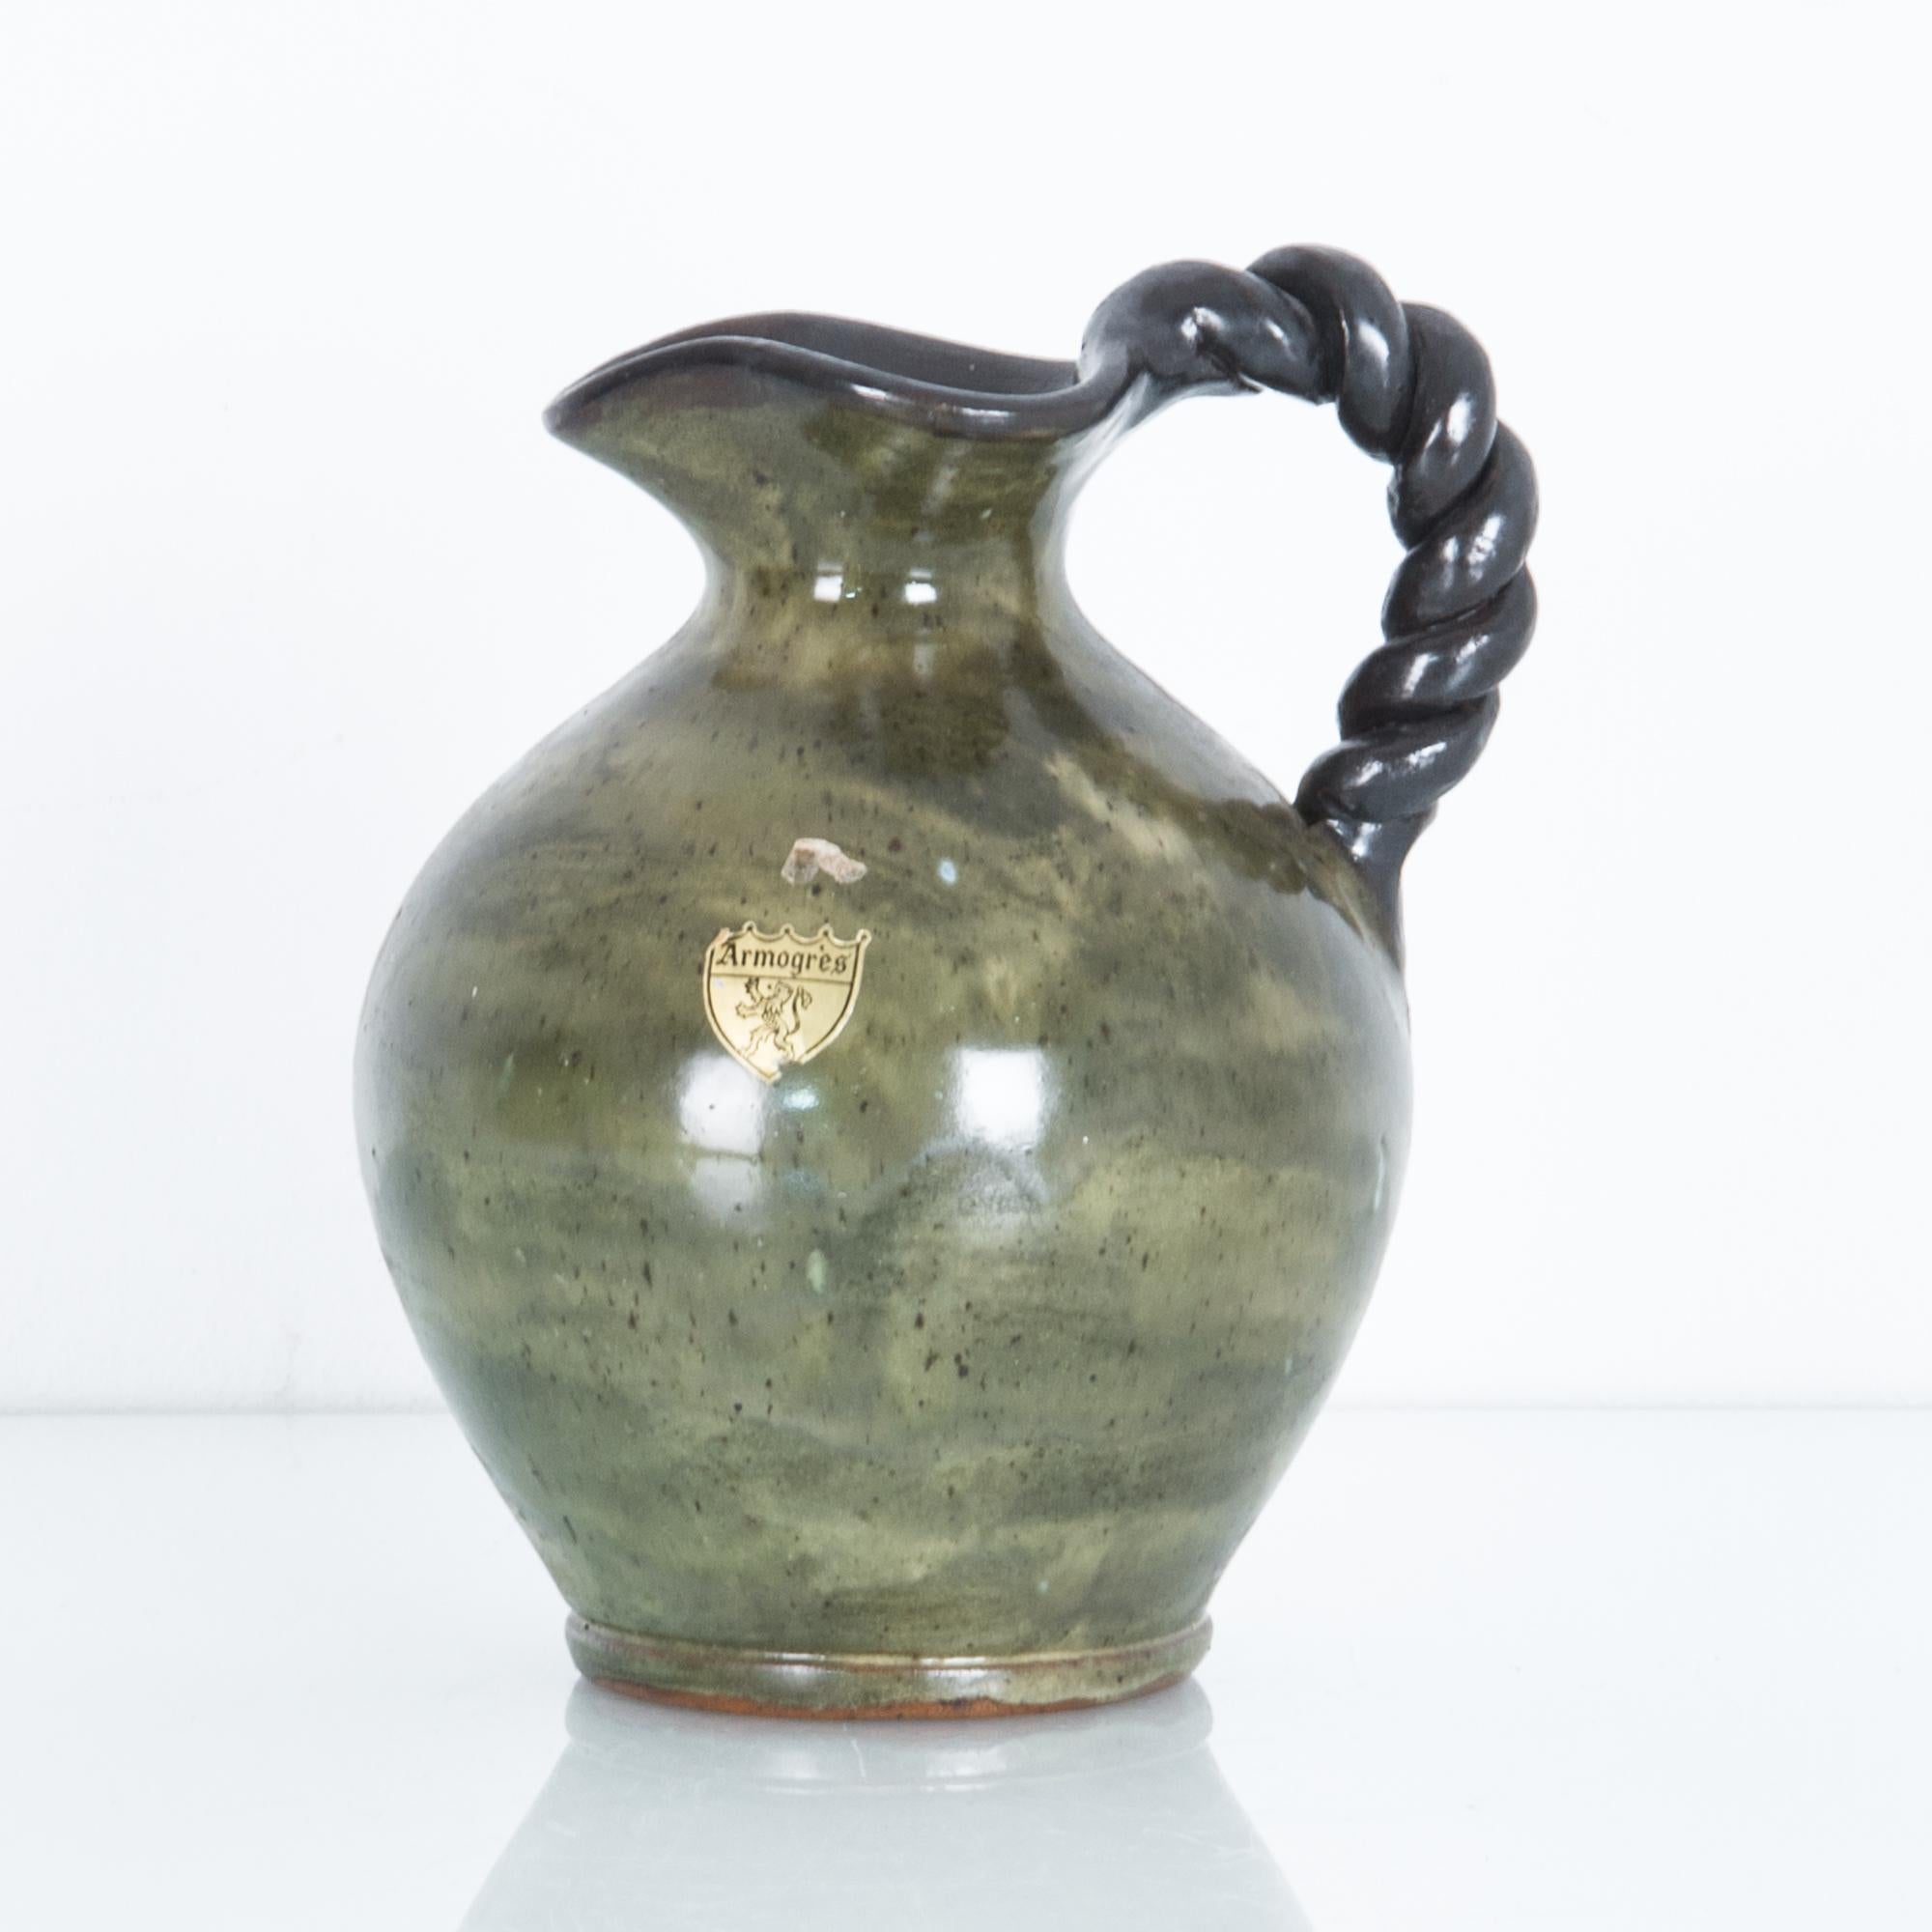 Ceramic stoneware pitcher from Belgium, circa 1950s. These distinctive ceramics pieces were produced in mid-20th century Belgium in the Bouffioulx region. Featuring distinctive twisted handles and graphic textured glazes on simple forms, a local